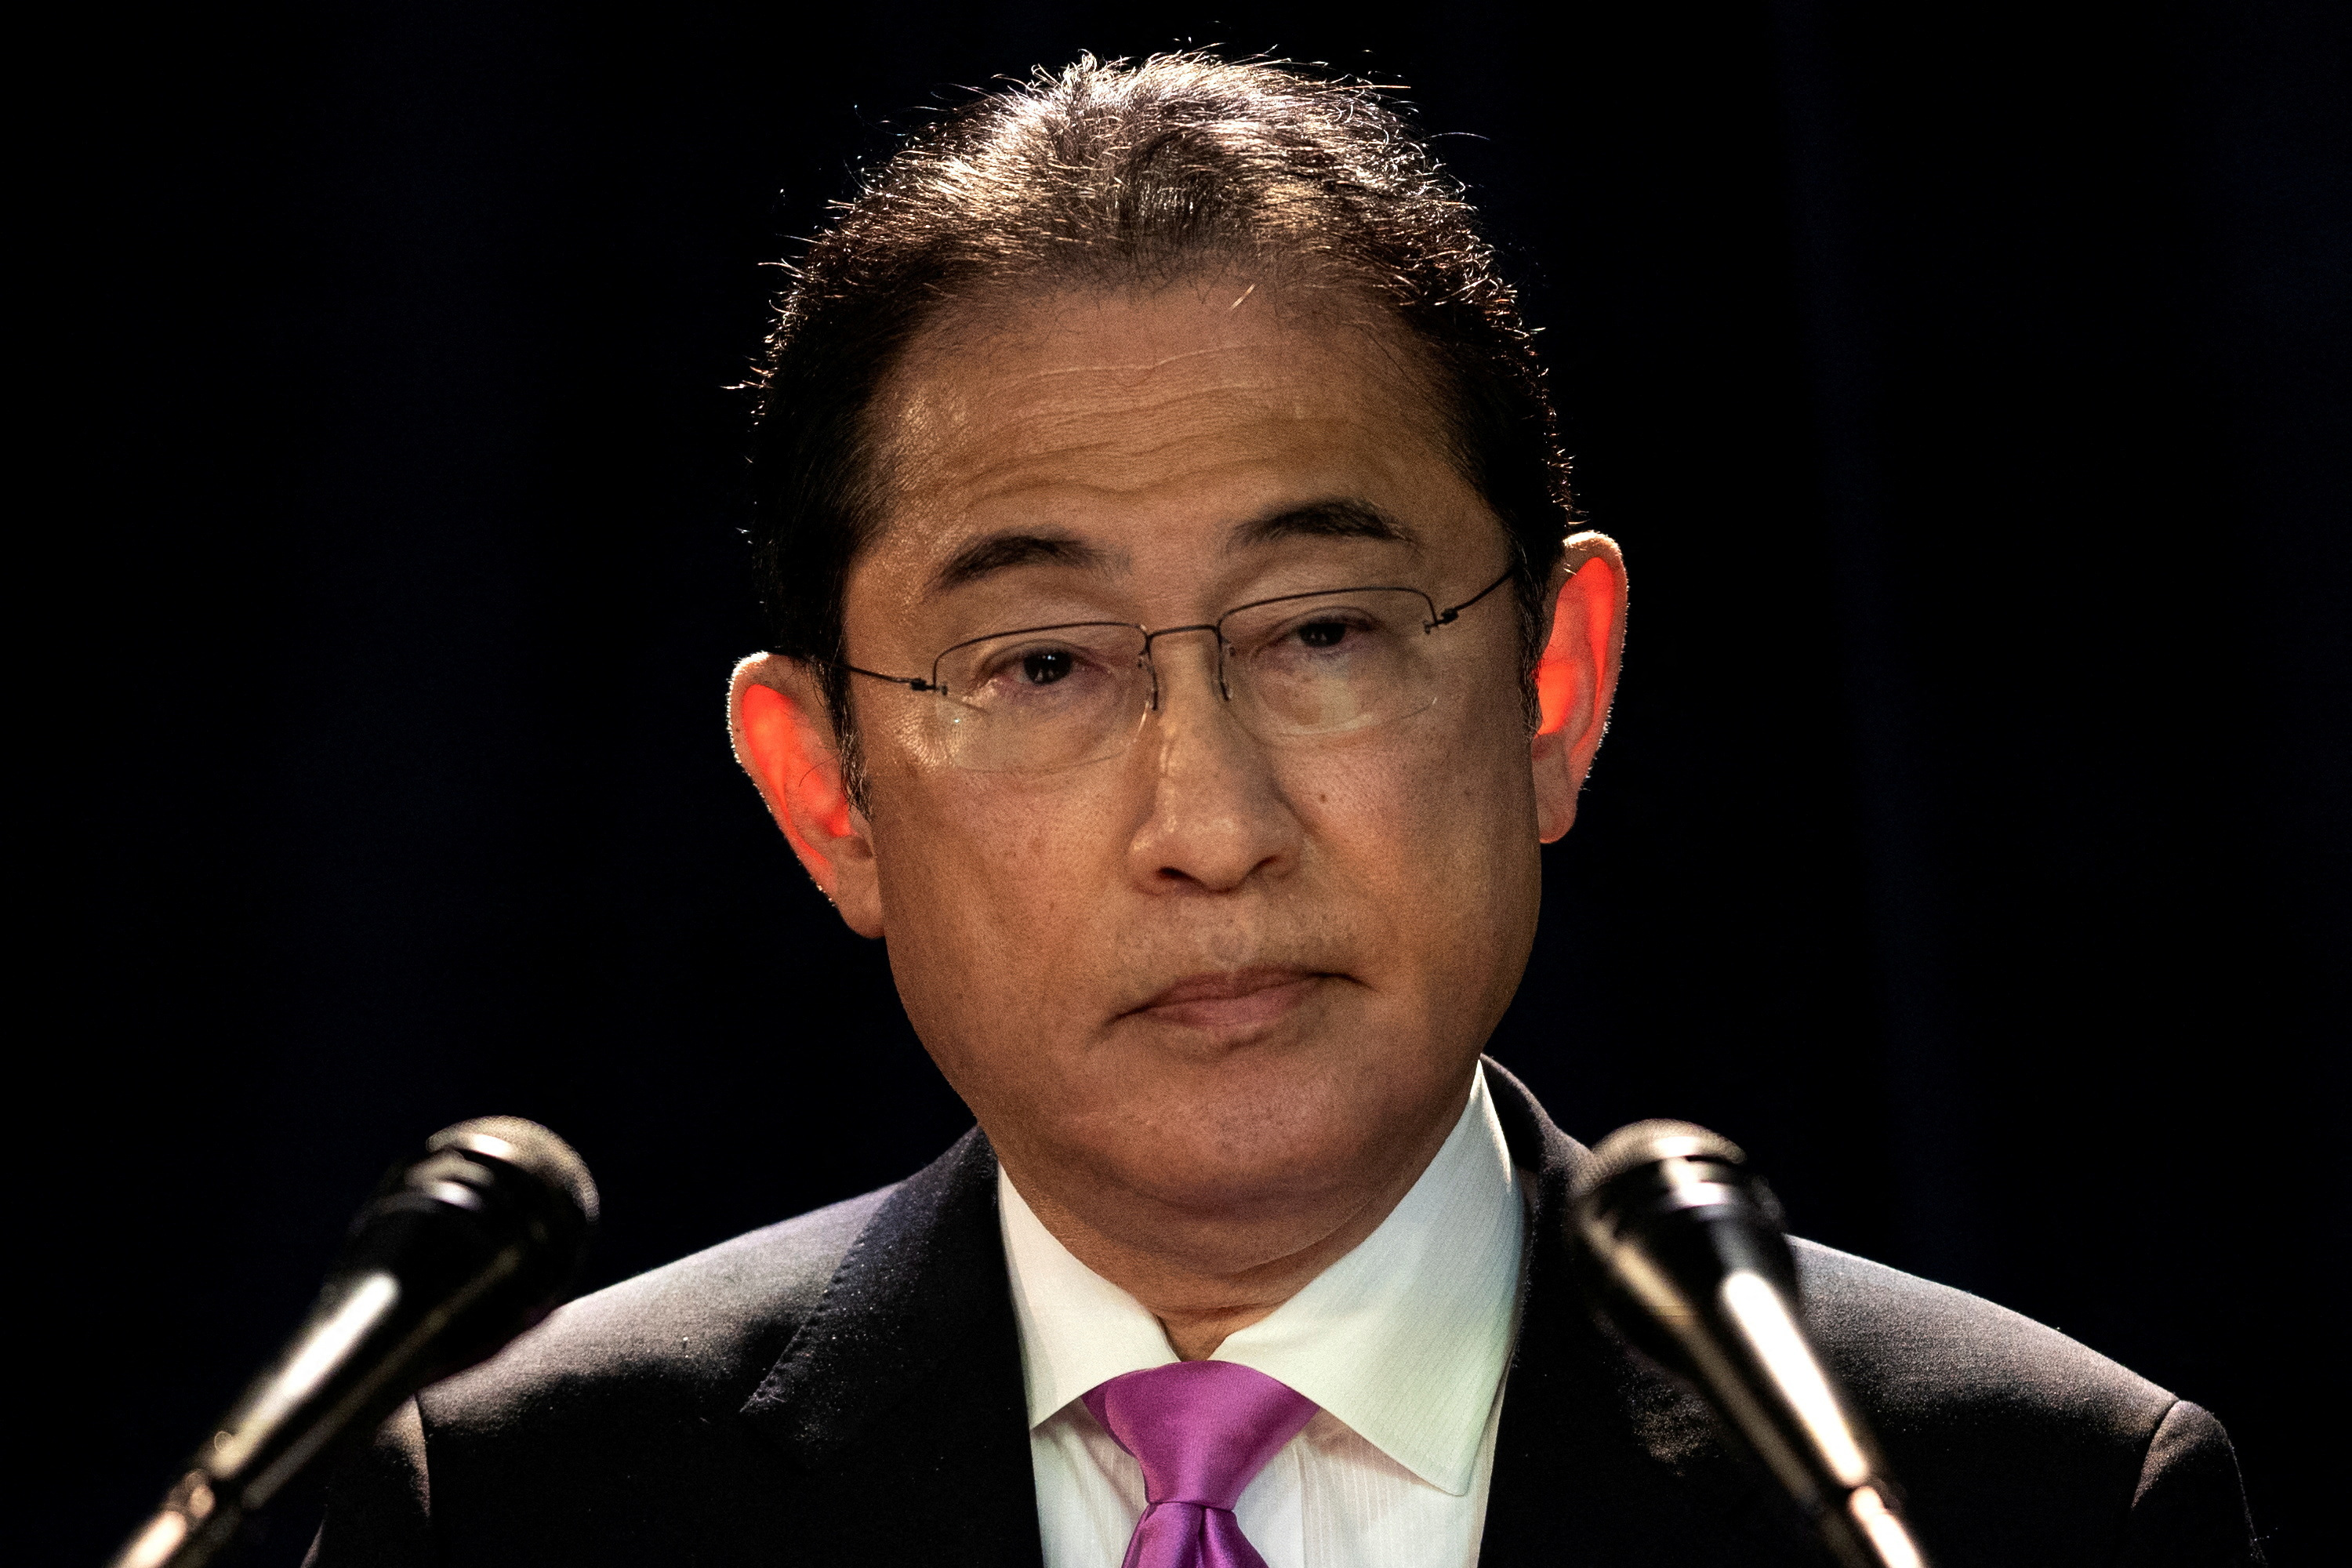 Japan's Prime Minister Fumio Kishida attends a news conference in Sao Paulo